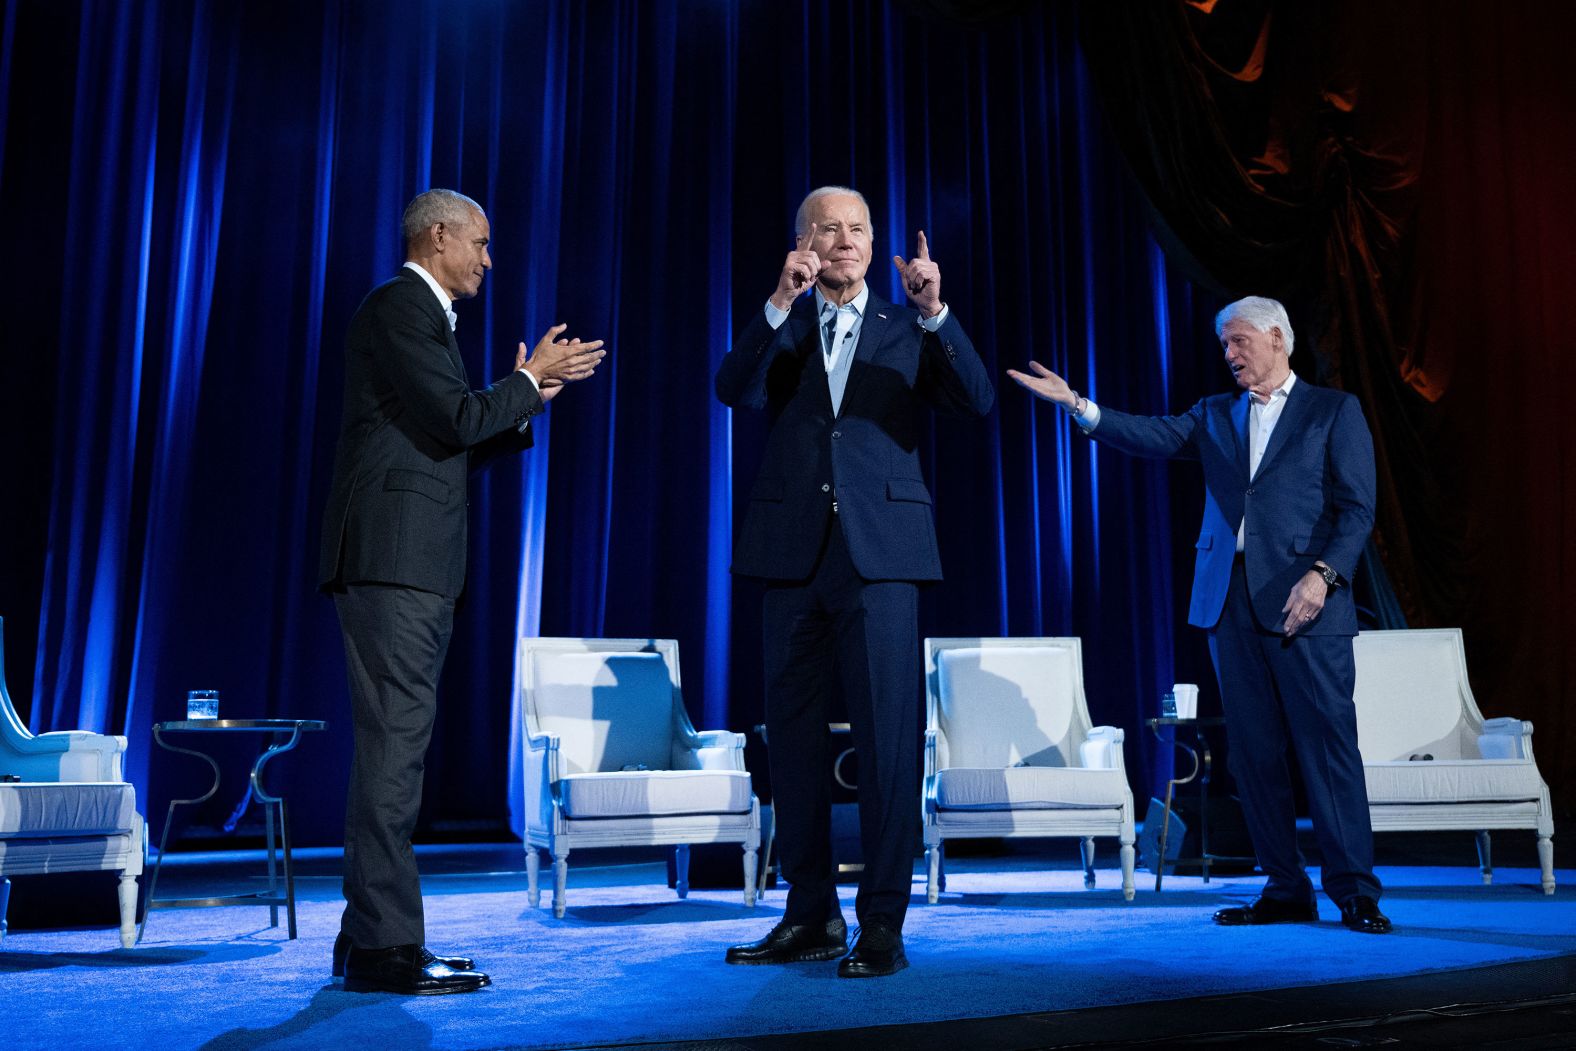 Barack Obama and Bill Clinton, the only living two-term Democratic presidents, join President Joe Biden on stage for <a href="index.php?page=&url=https%3A%2F%2Fwww.cnn.com%2F2024%2F03%2F28%2Fpolitics%2Fbiden-obama-clinton-nyc-fundraiser%2Findex.html" target="_blank">a campaign fundraising event</a> at Radio City Music Hall in New York on Thursday, March 28.